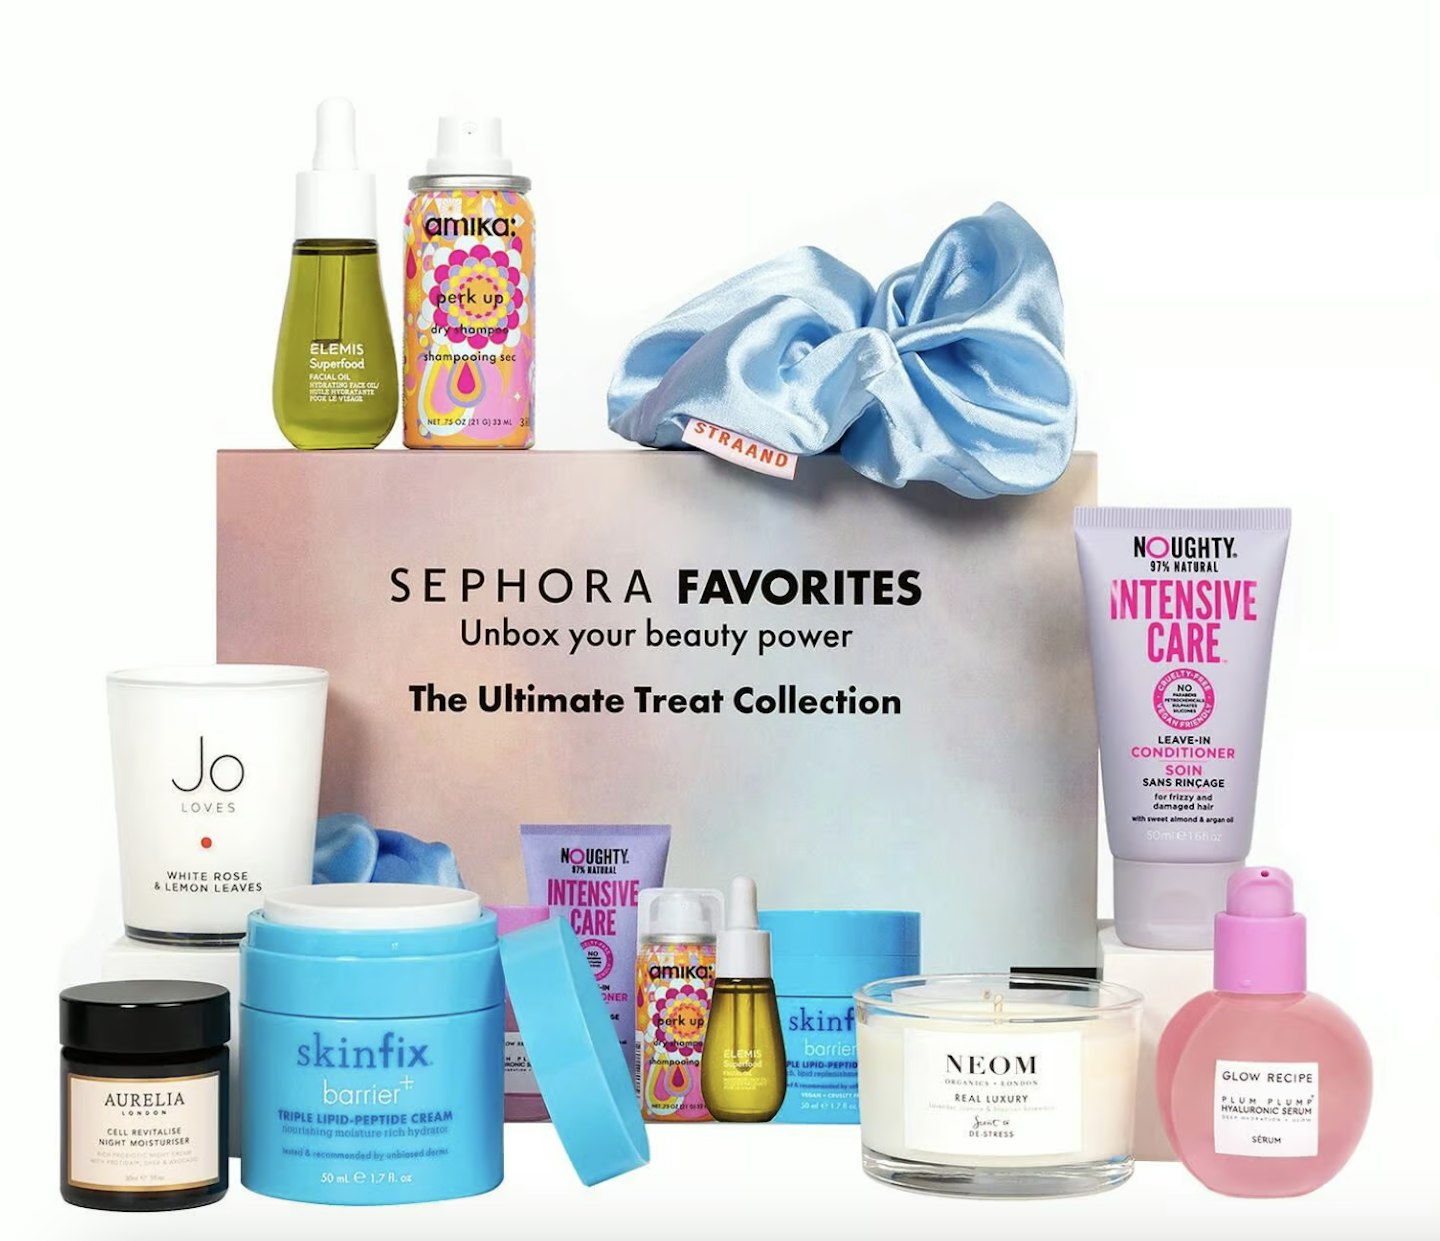 SEPHORA FAVORITES The Ultimate Treat Collection 